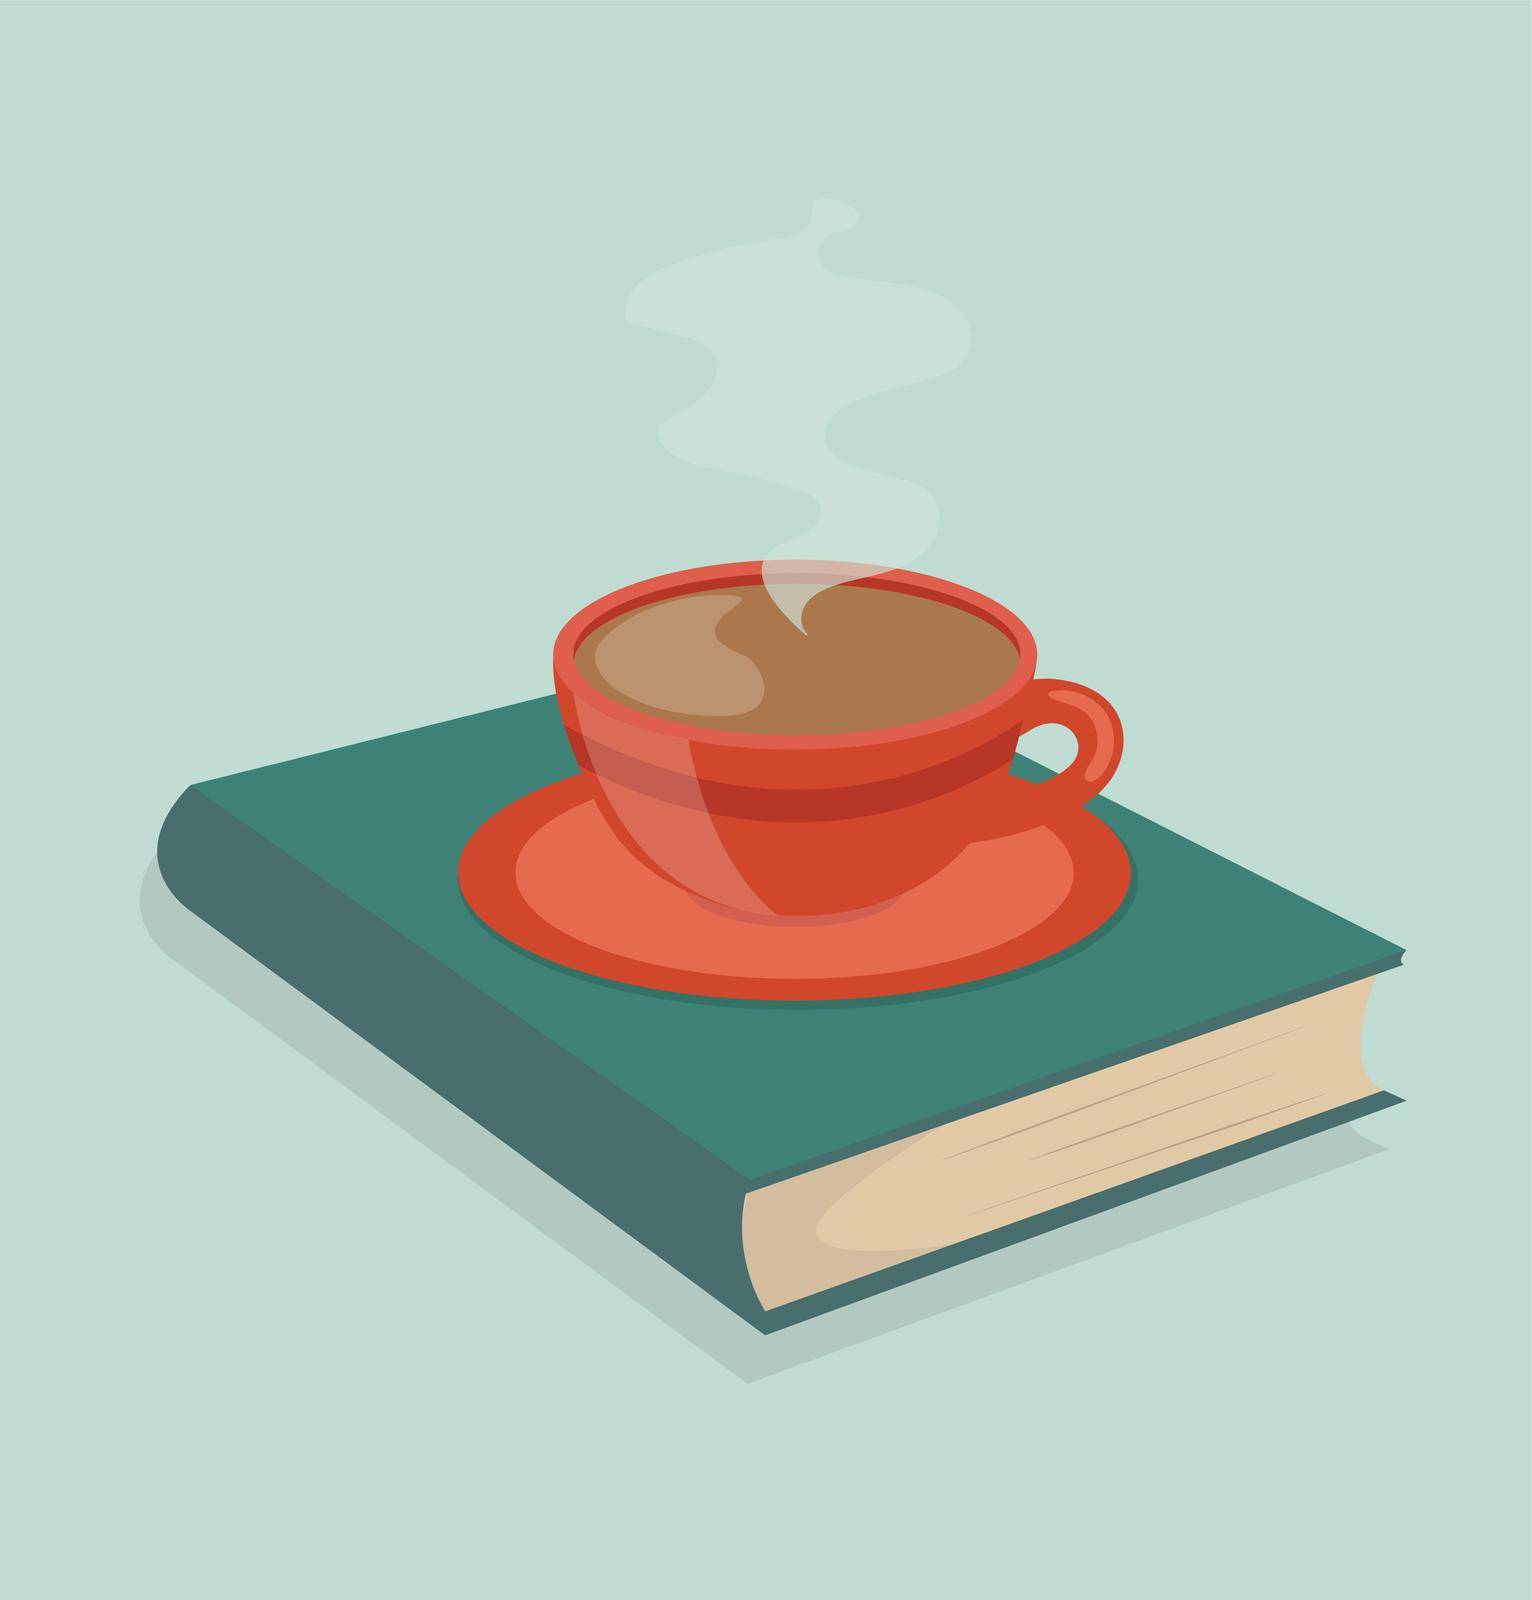 coffee hot with book by focus_bell